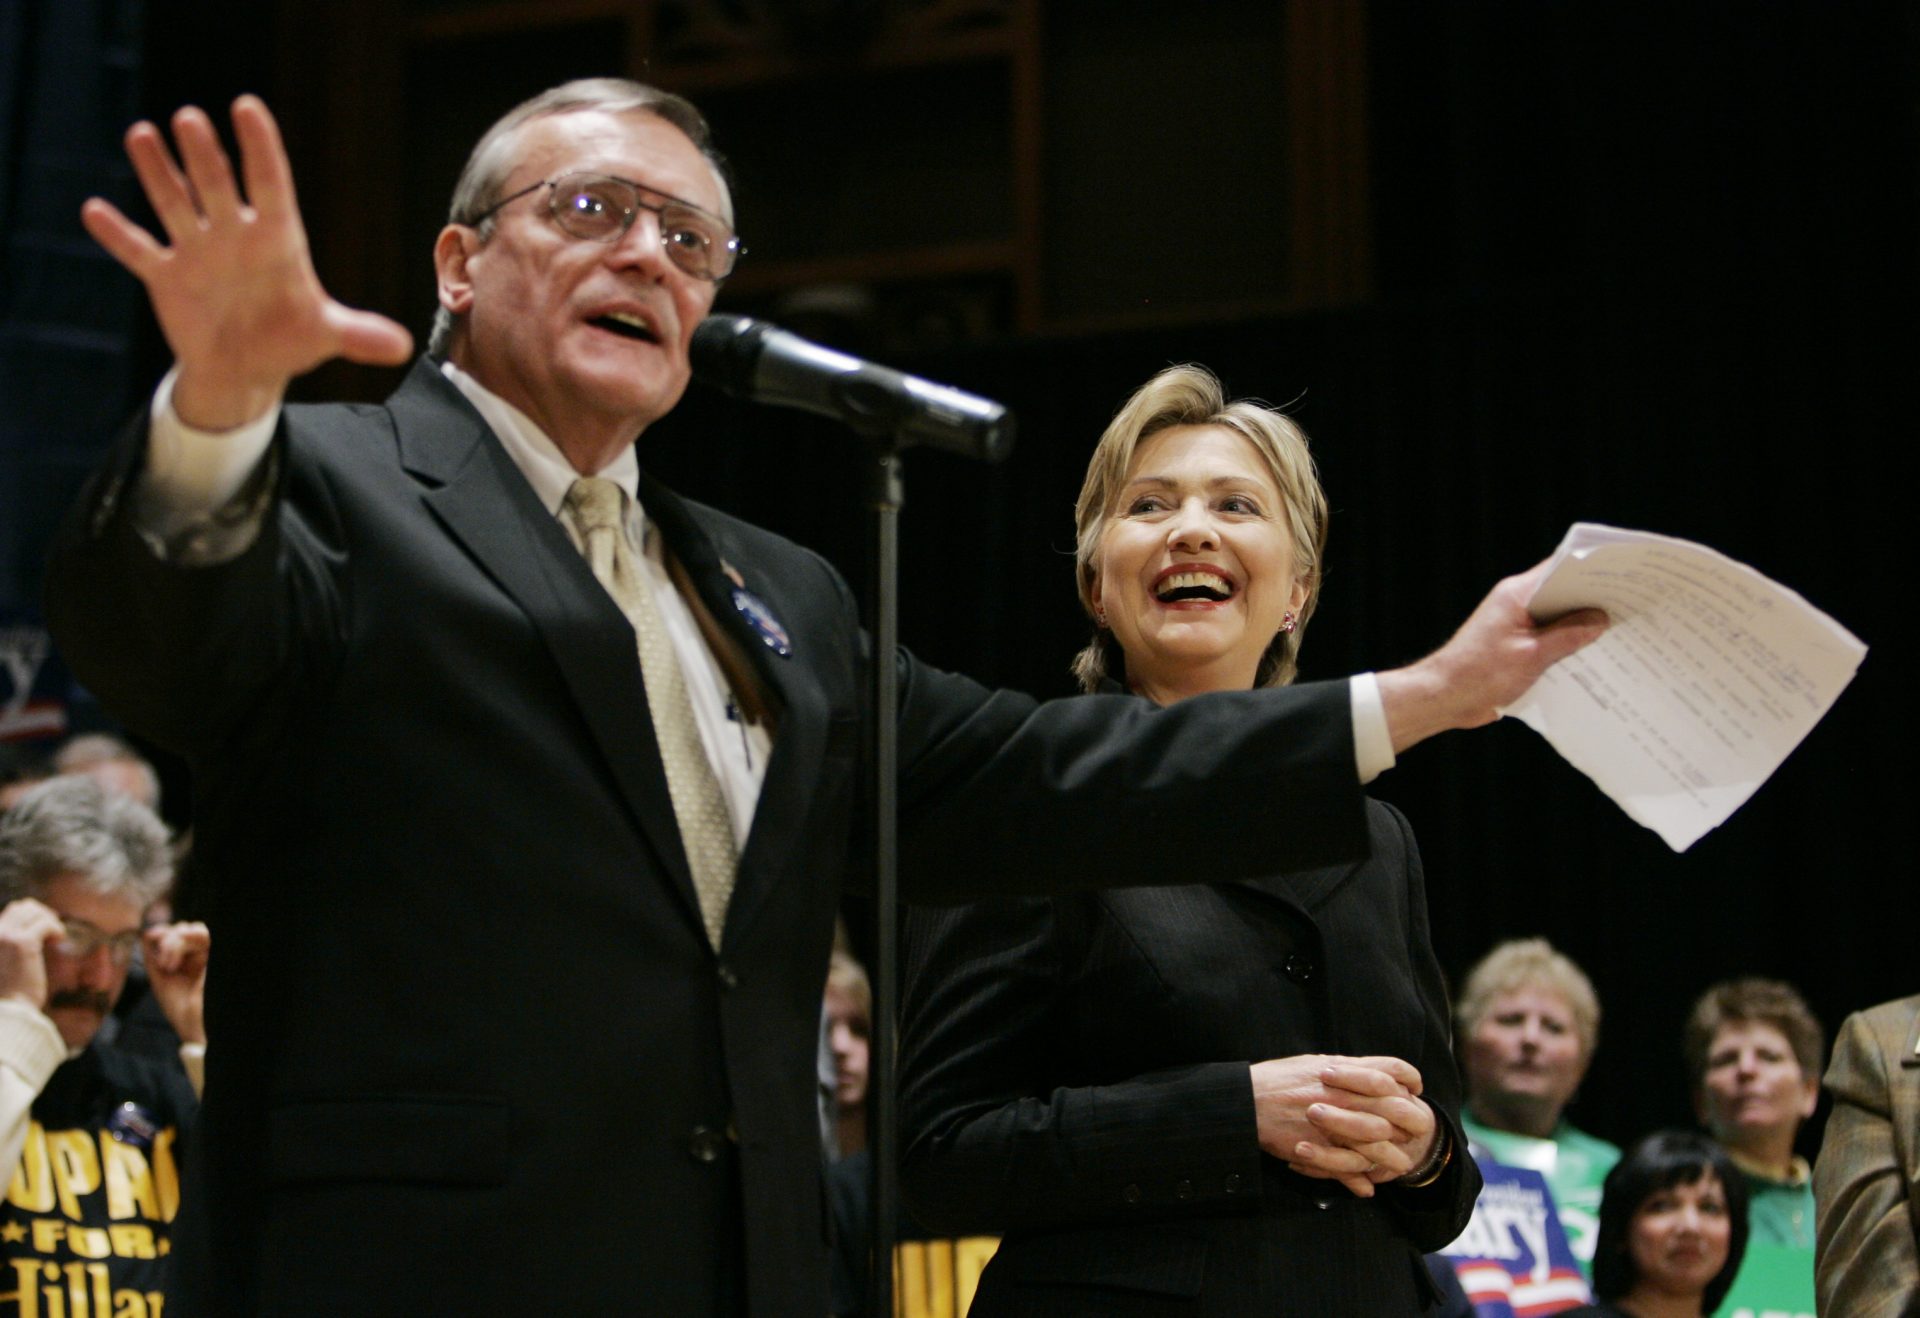 FILE PHOTO: Harrisburg Mayor Stephen Reed introduces Democratic presidential hopeful, Sen. Hillary Rodham Clinton, D-N.Y., during a campaign stop at The Forum, Tuesday, March 11, 2008, in Harrisburg, Pa.